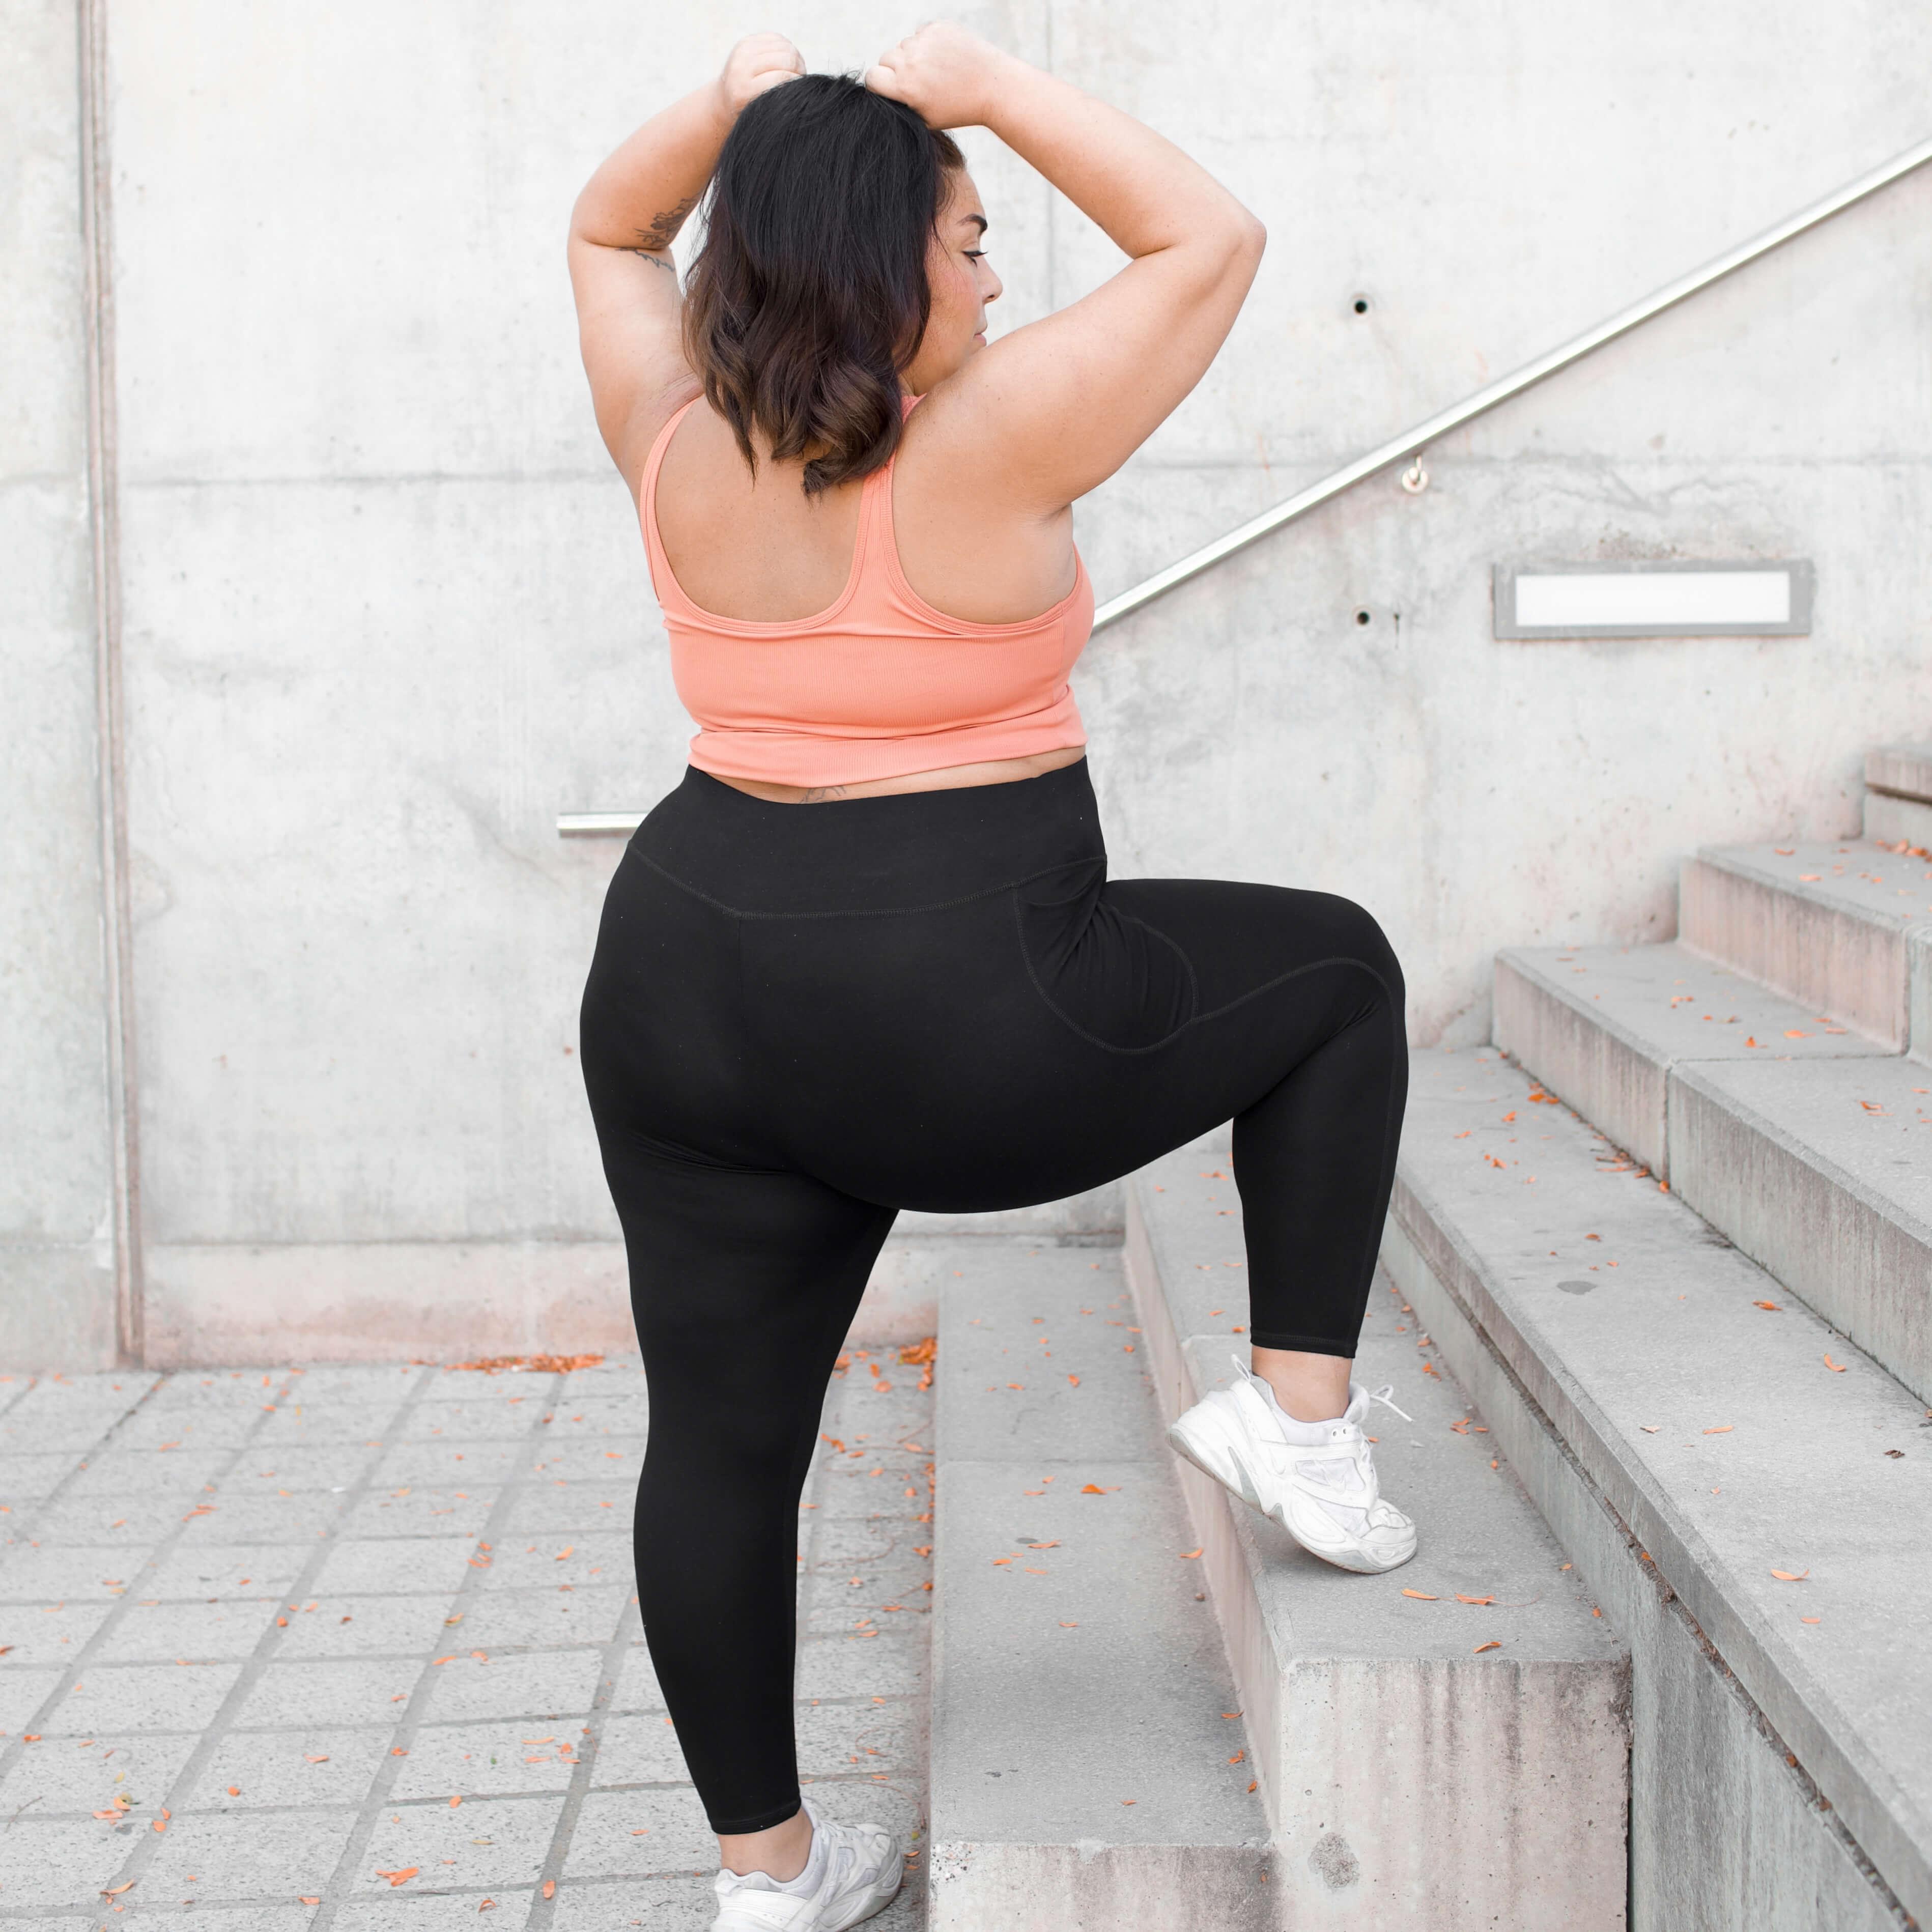 How To Find Squat-proof Leggings. Nike SG